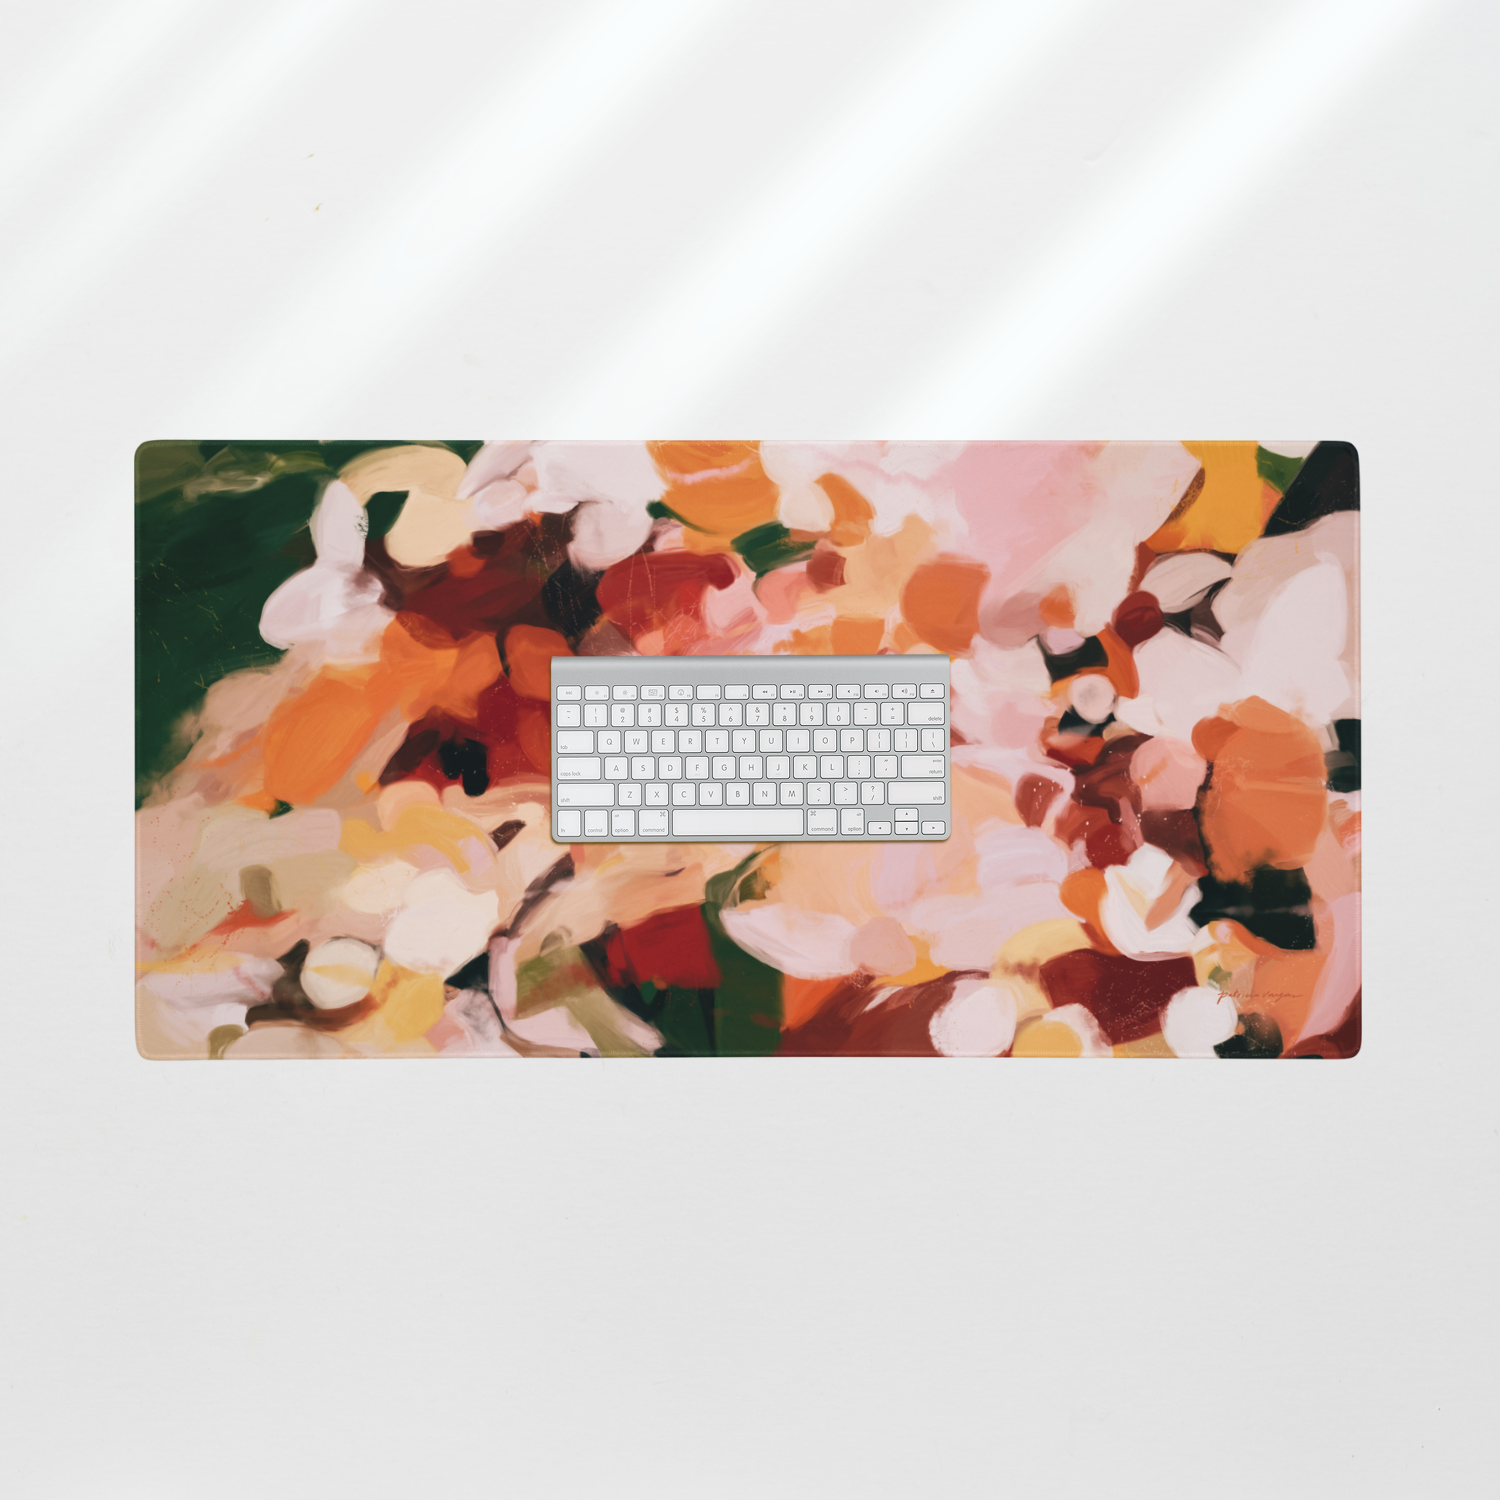 The Grove, pink and green mouse pad for styling your office desk. Featuring artwork by Parima Studio. Home office styling accessories, cubicle styling accessories.